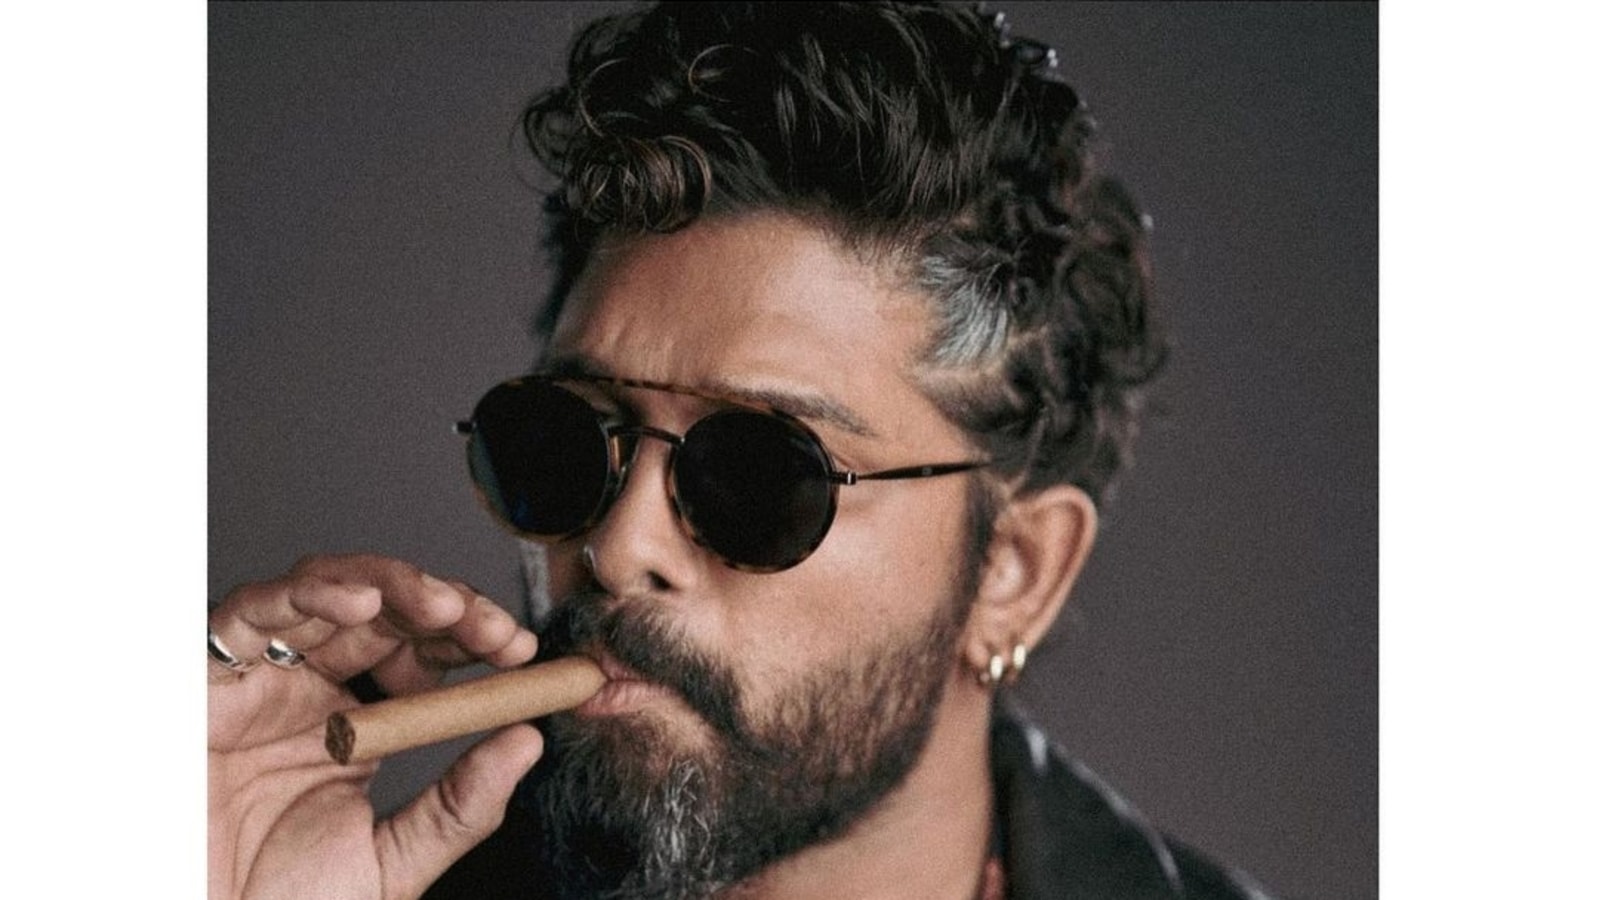 Allu Arjun shares pic with cigar, fans ask if it's his look from ...